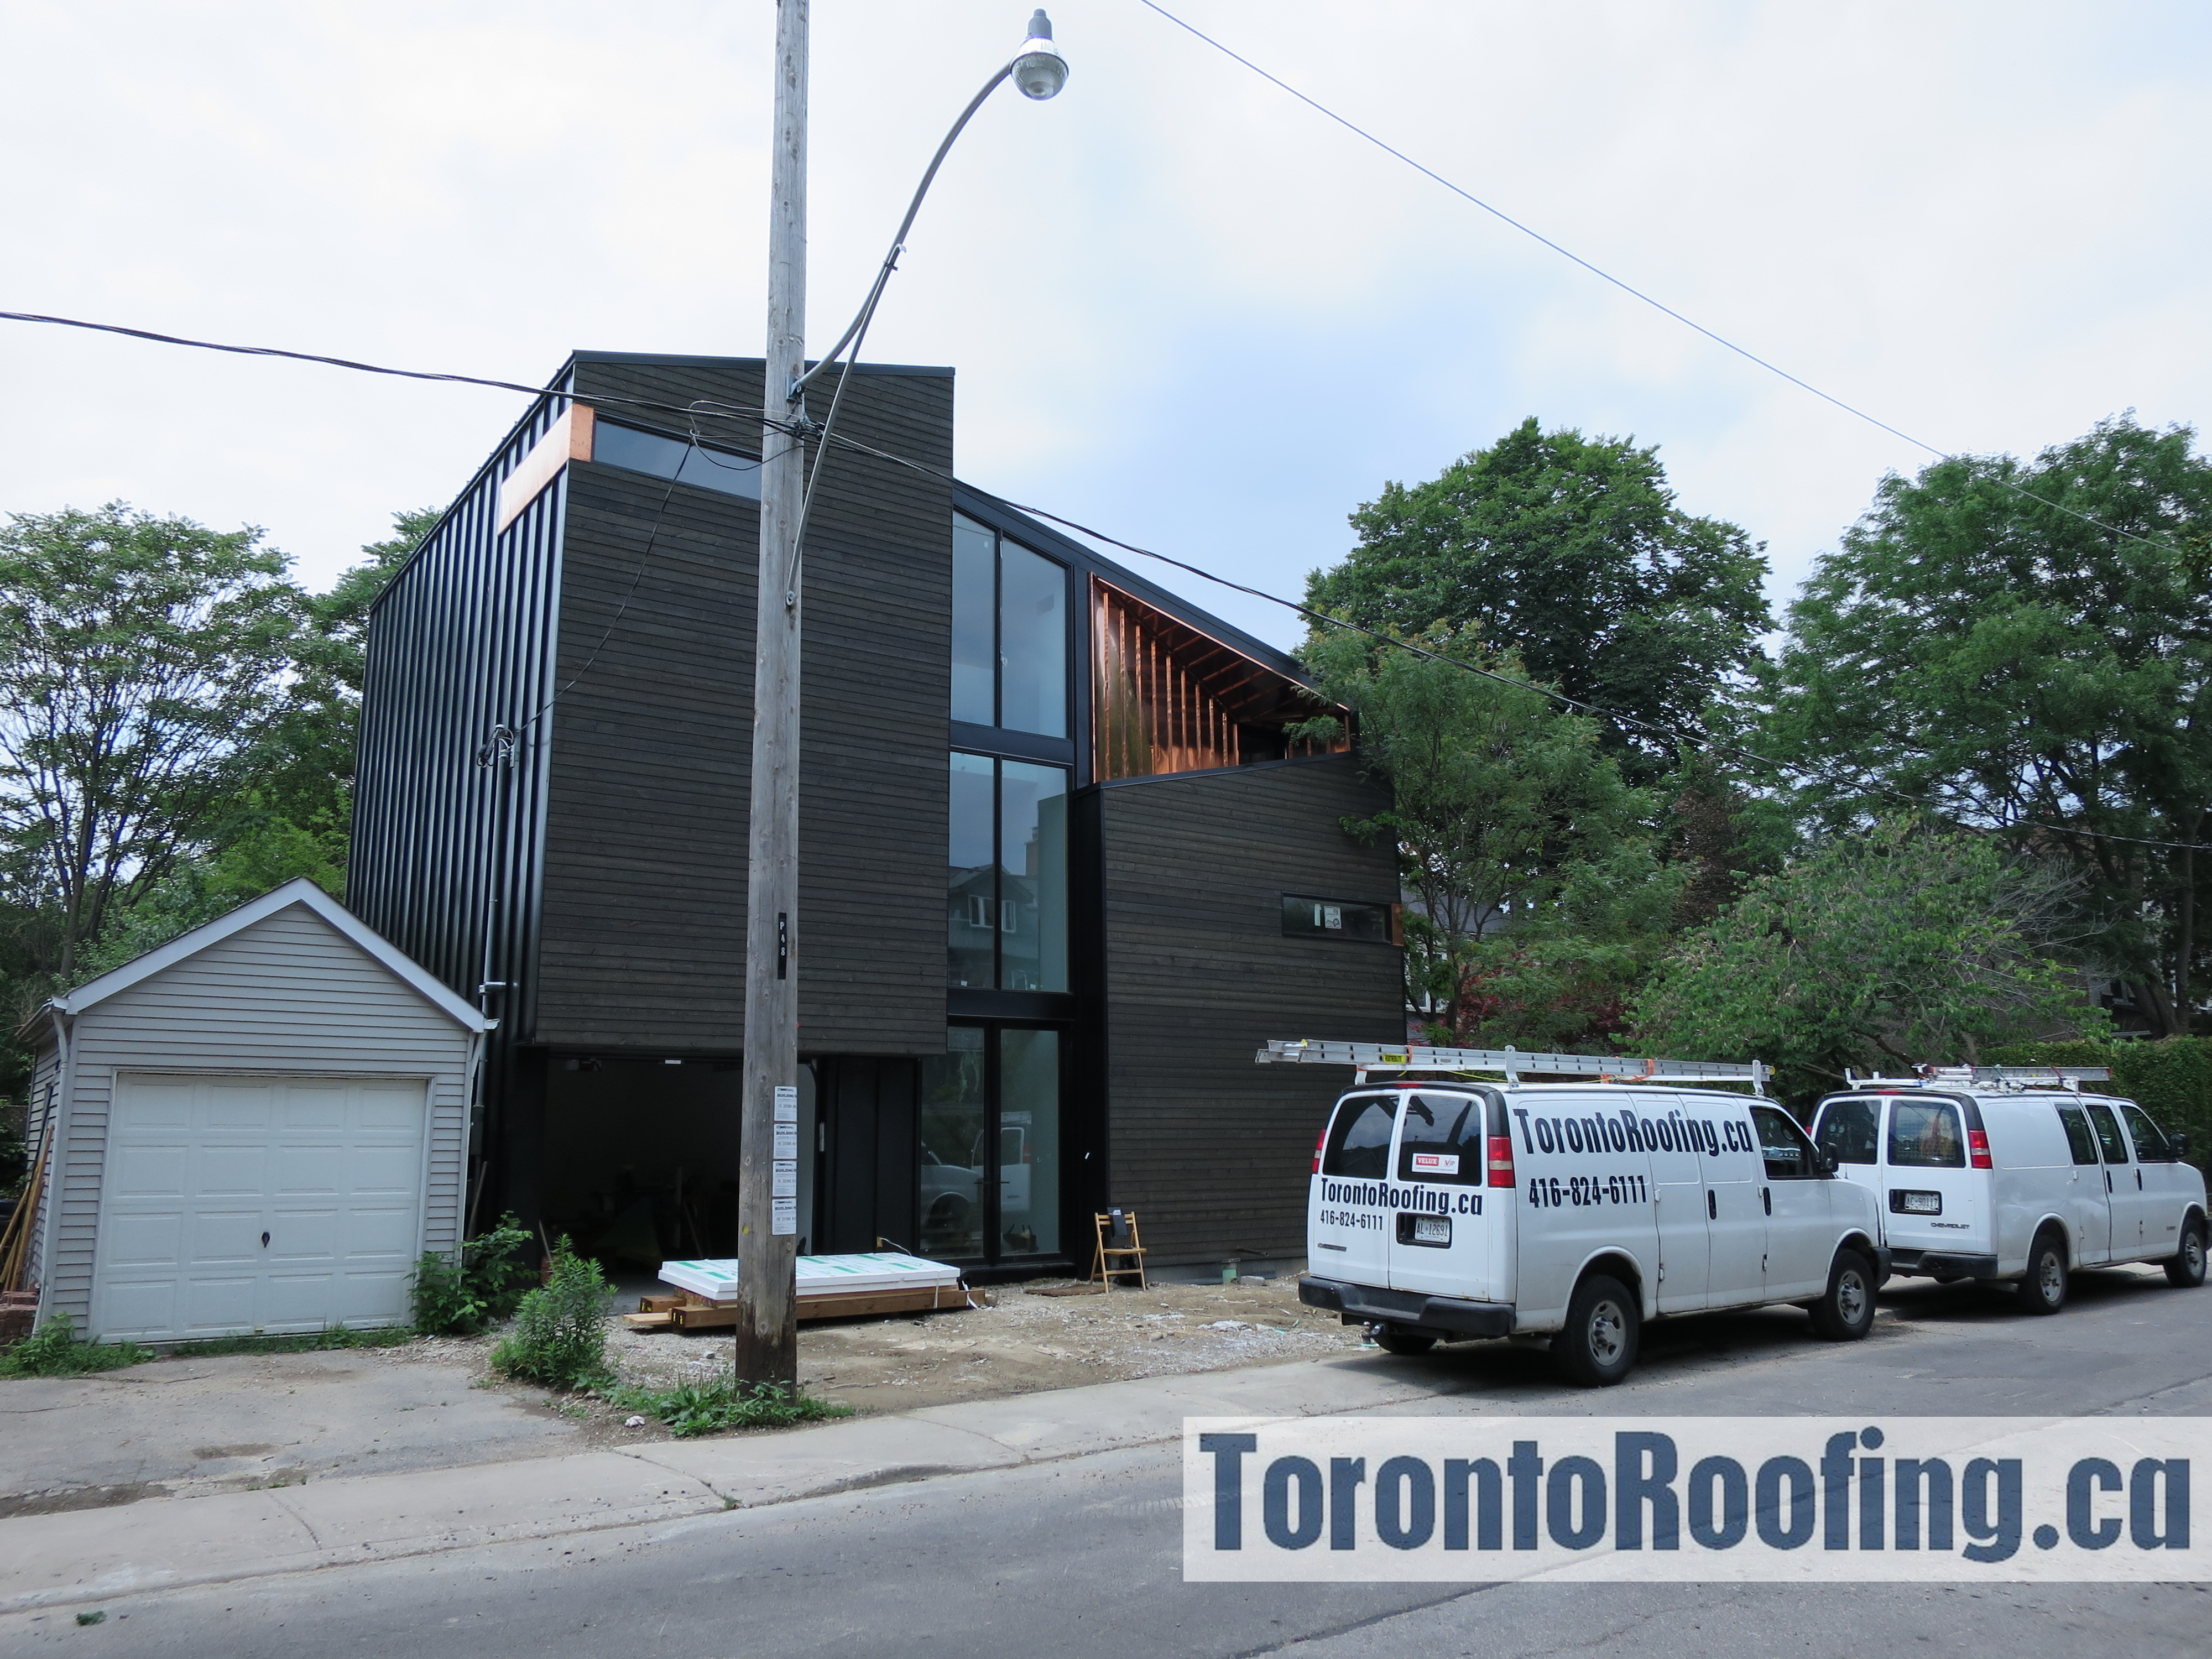 toronto-roofing-roof-siding-metal-copper-wood-modern-homes-aluminum-cladding-architeture-building-contractor-exterior-6